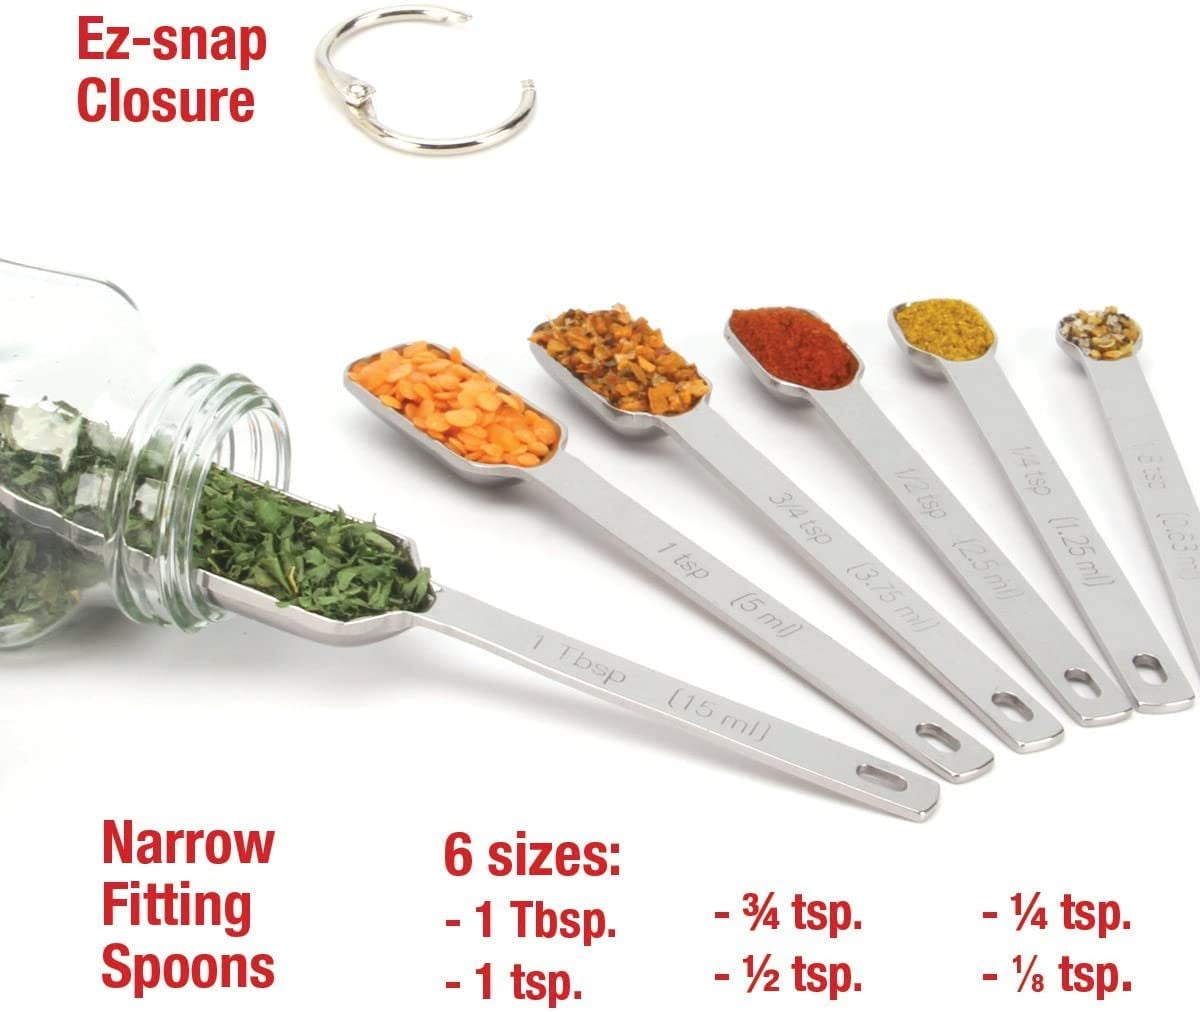 Heavy Duty Stainless Steel Metal Measuring Spoons (Set of 7 Including – Spring  Chef